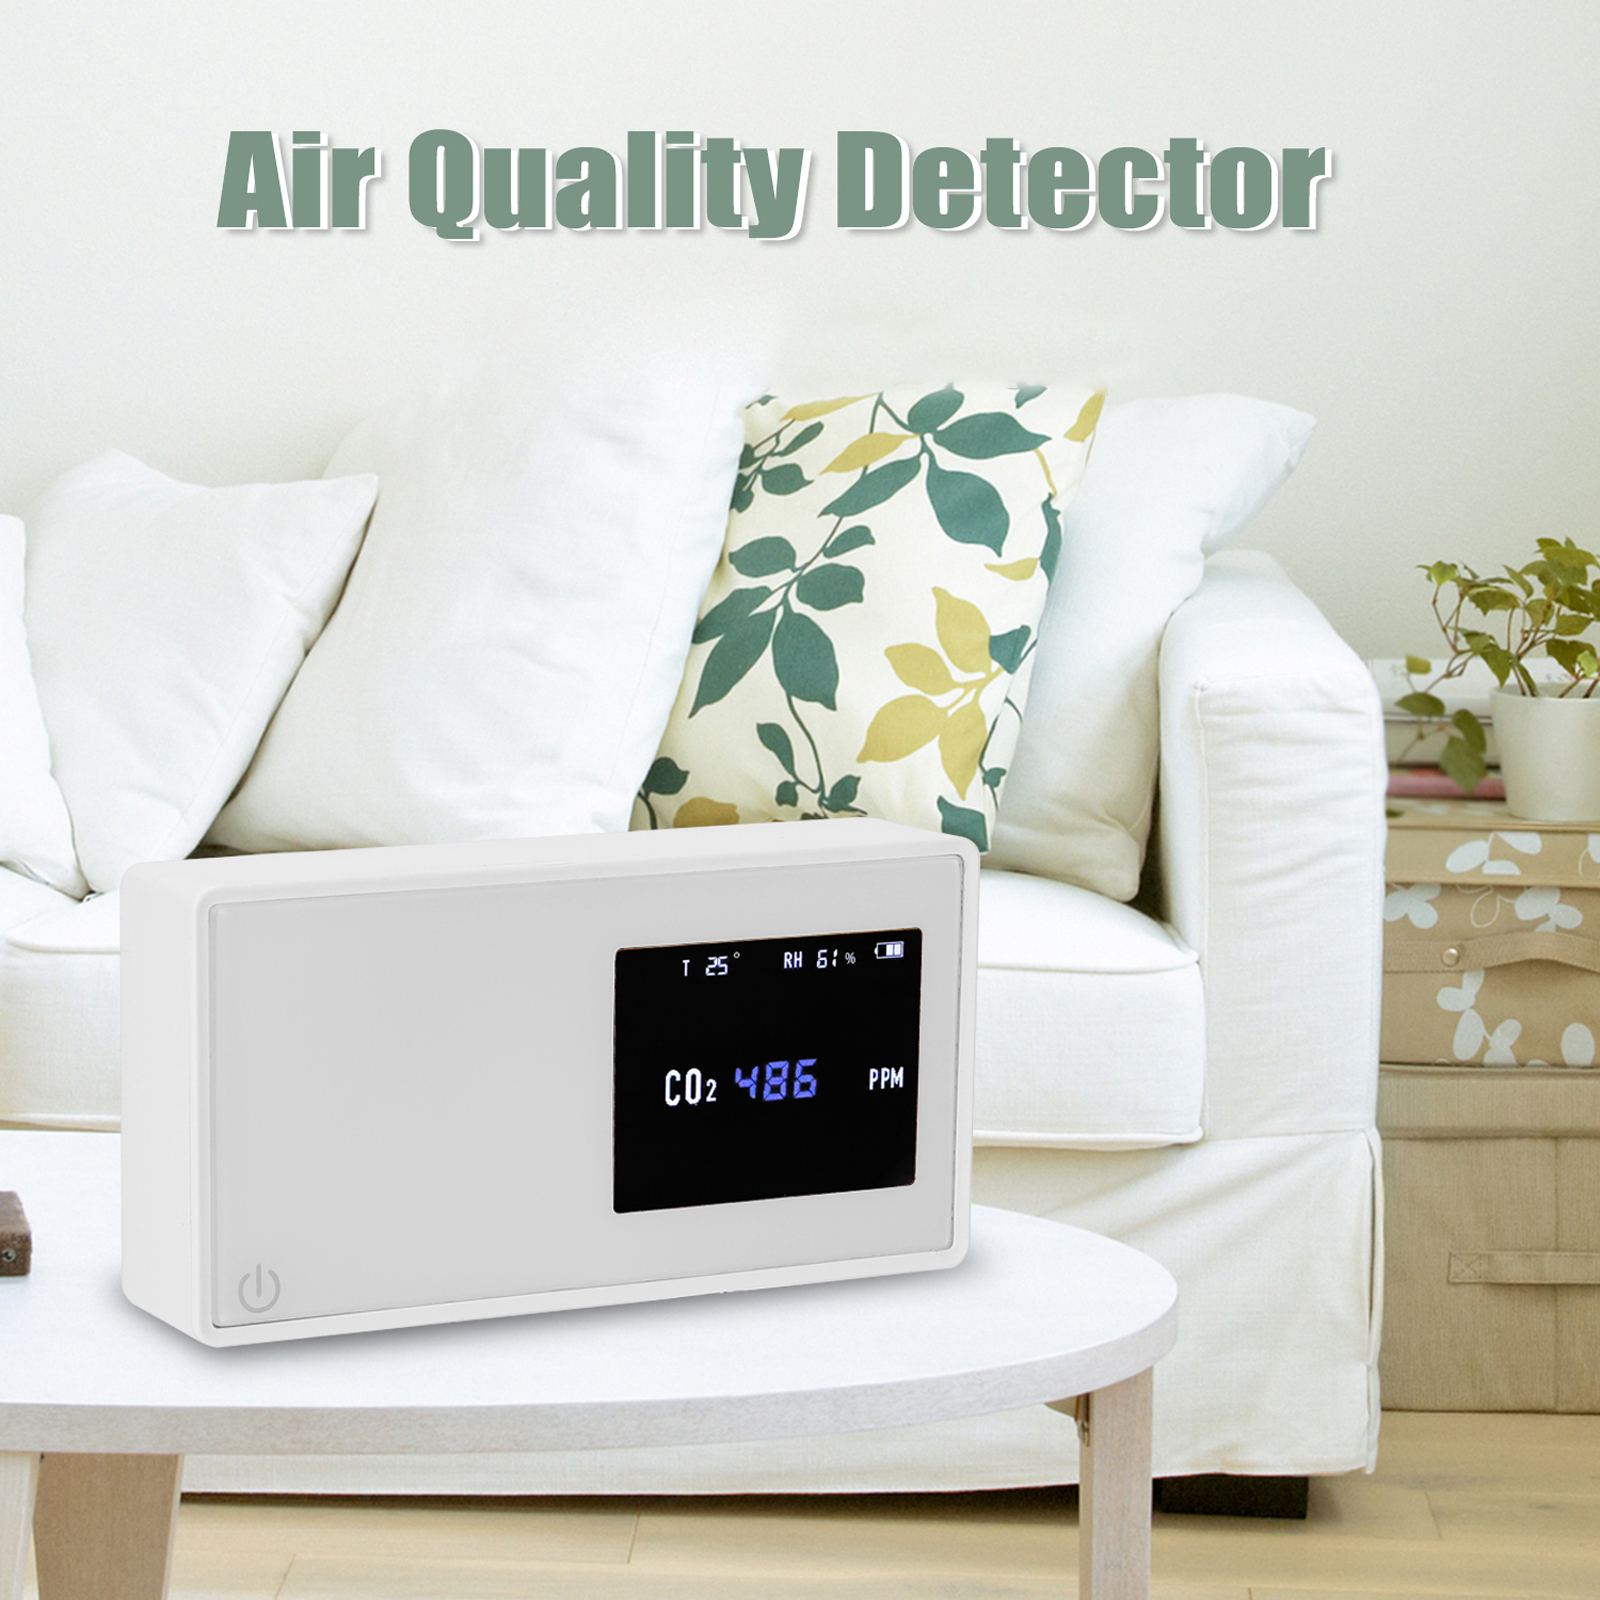 co2 meter Air Quality Detector CO2 Test with Carbon Dioxide Value Electricity Quantity Temperature Humidity Display Gas Analyzer